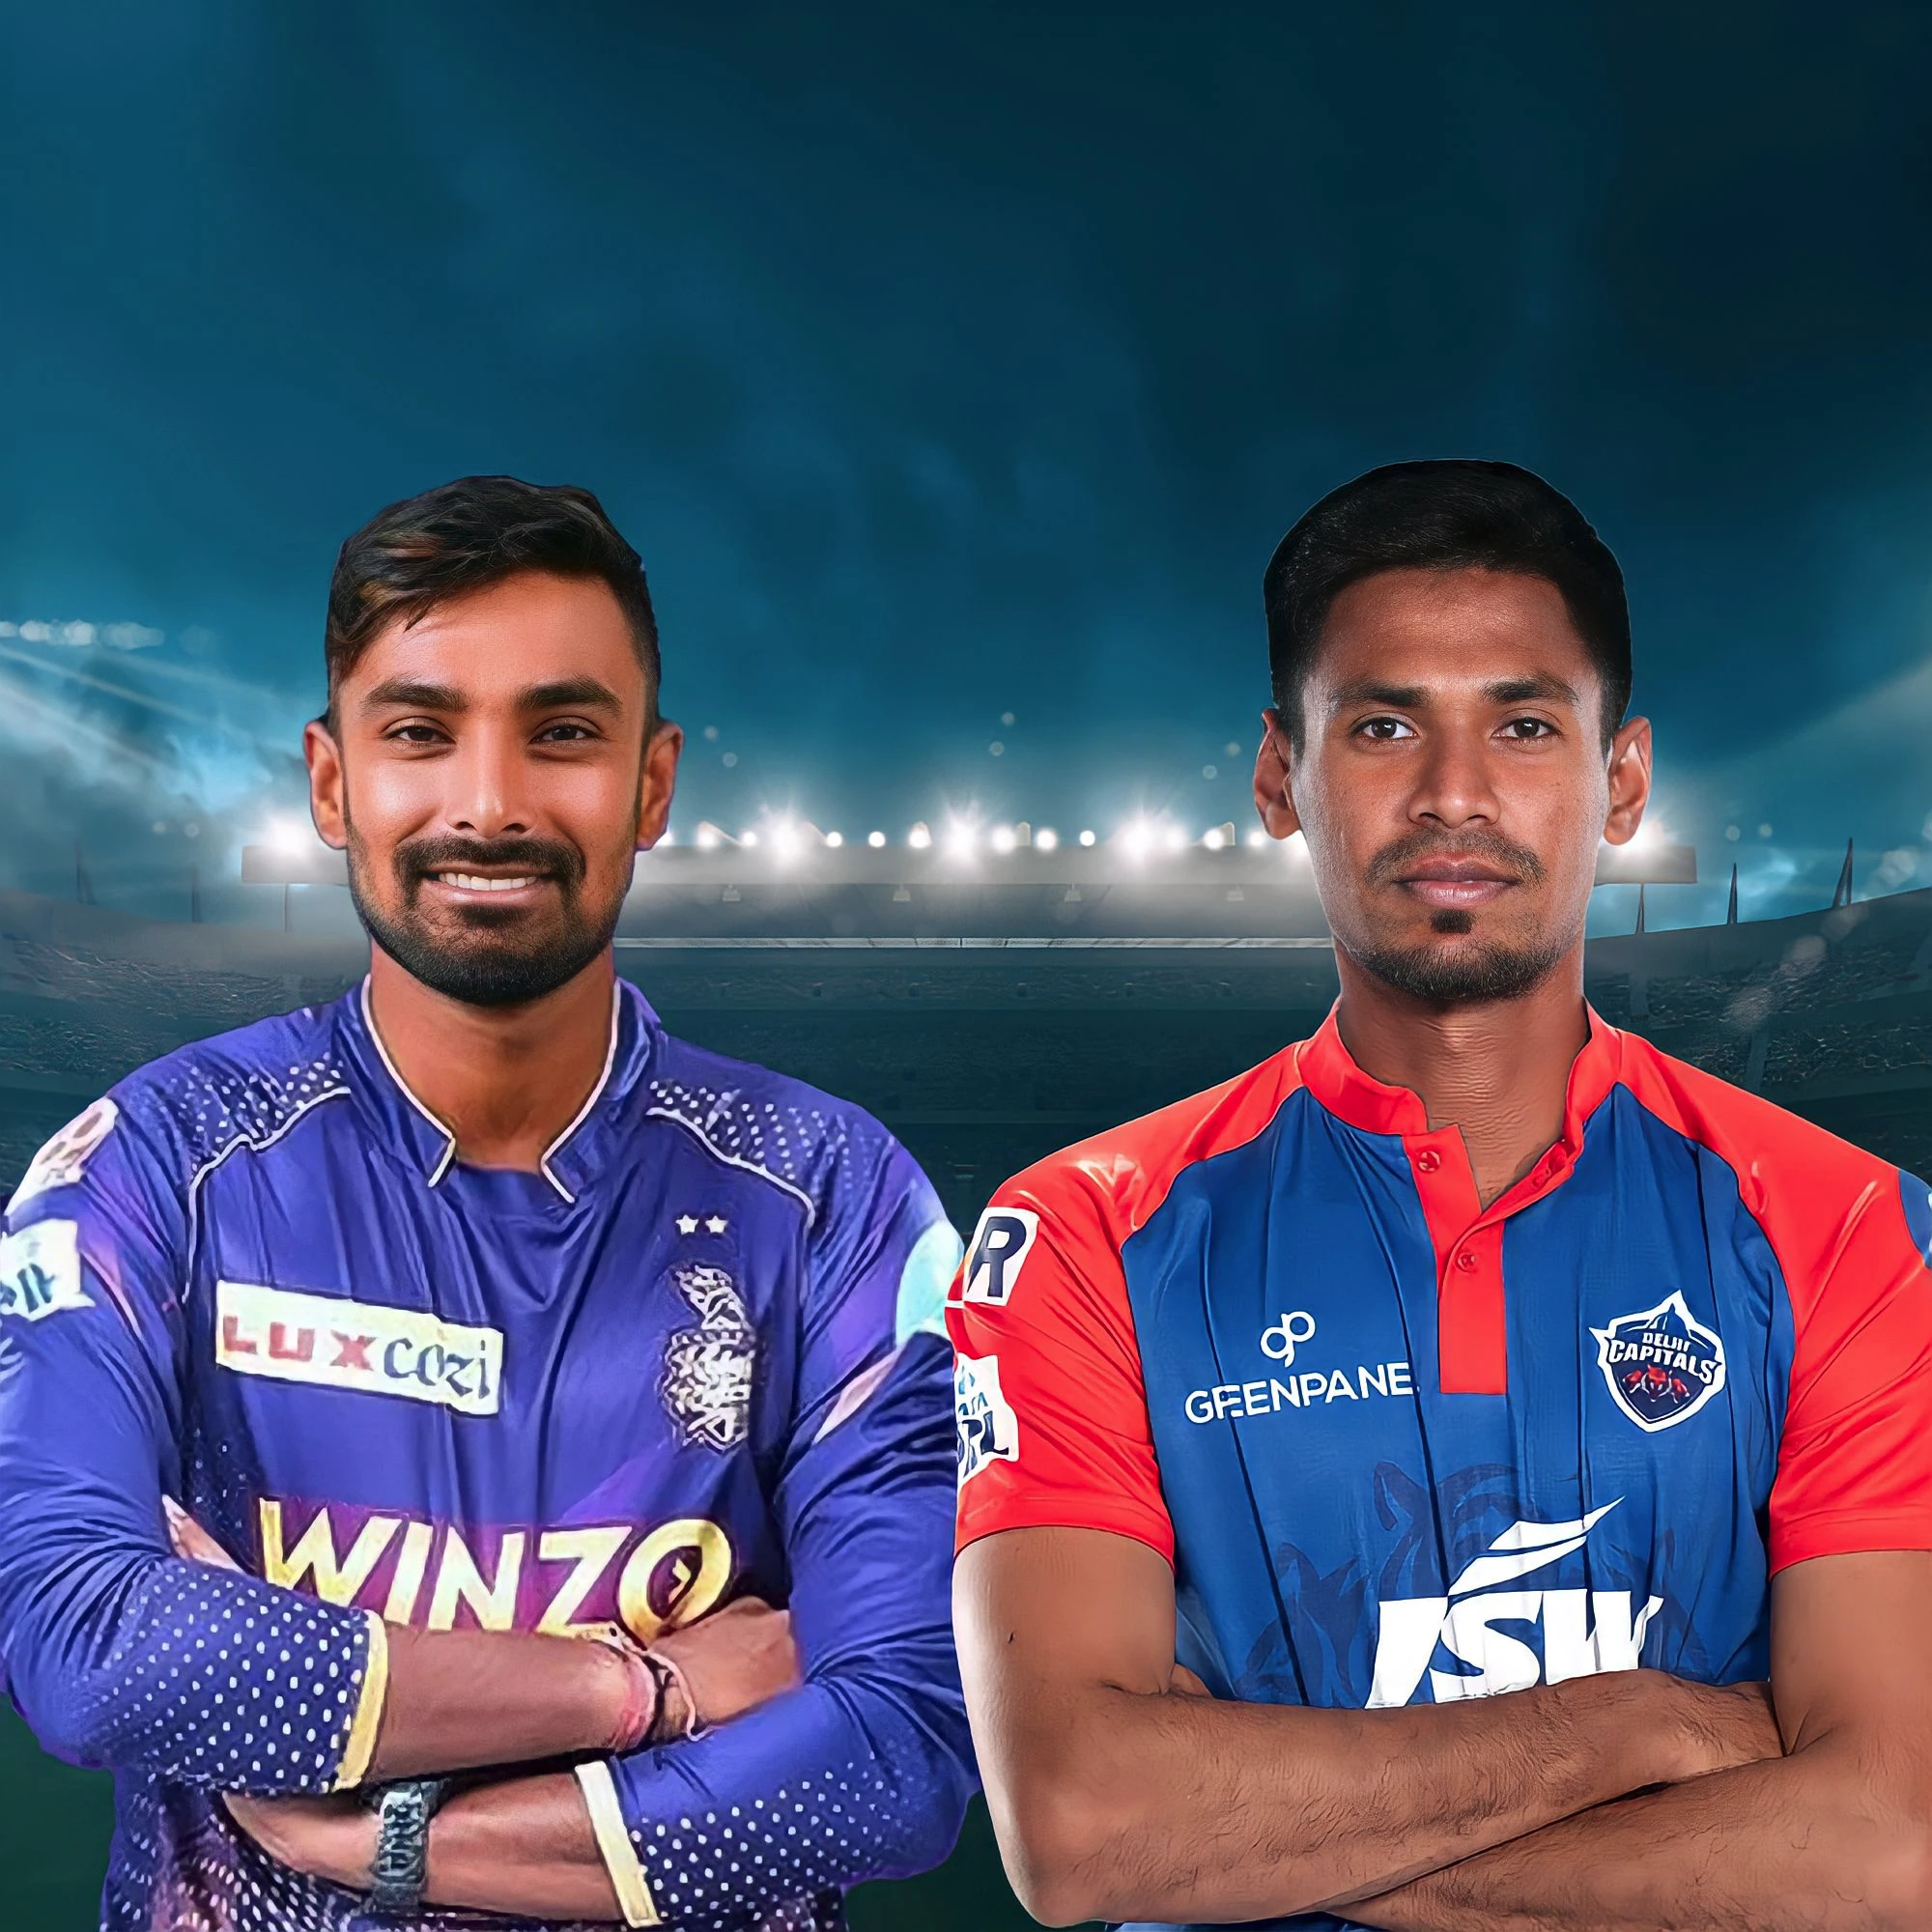 Fans Excitedly Await Potential Liton-Fizz Duel in IPL